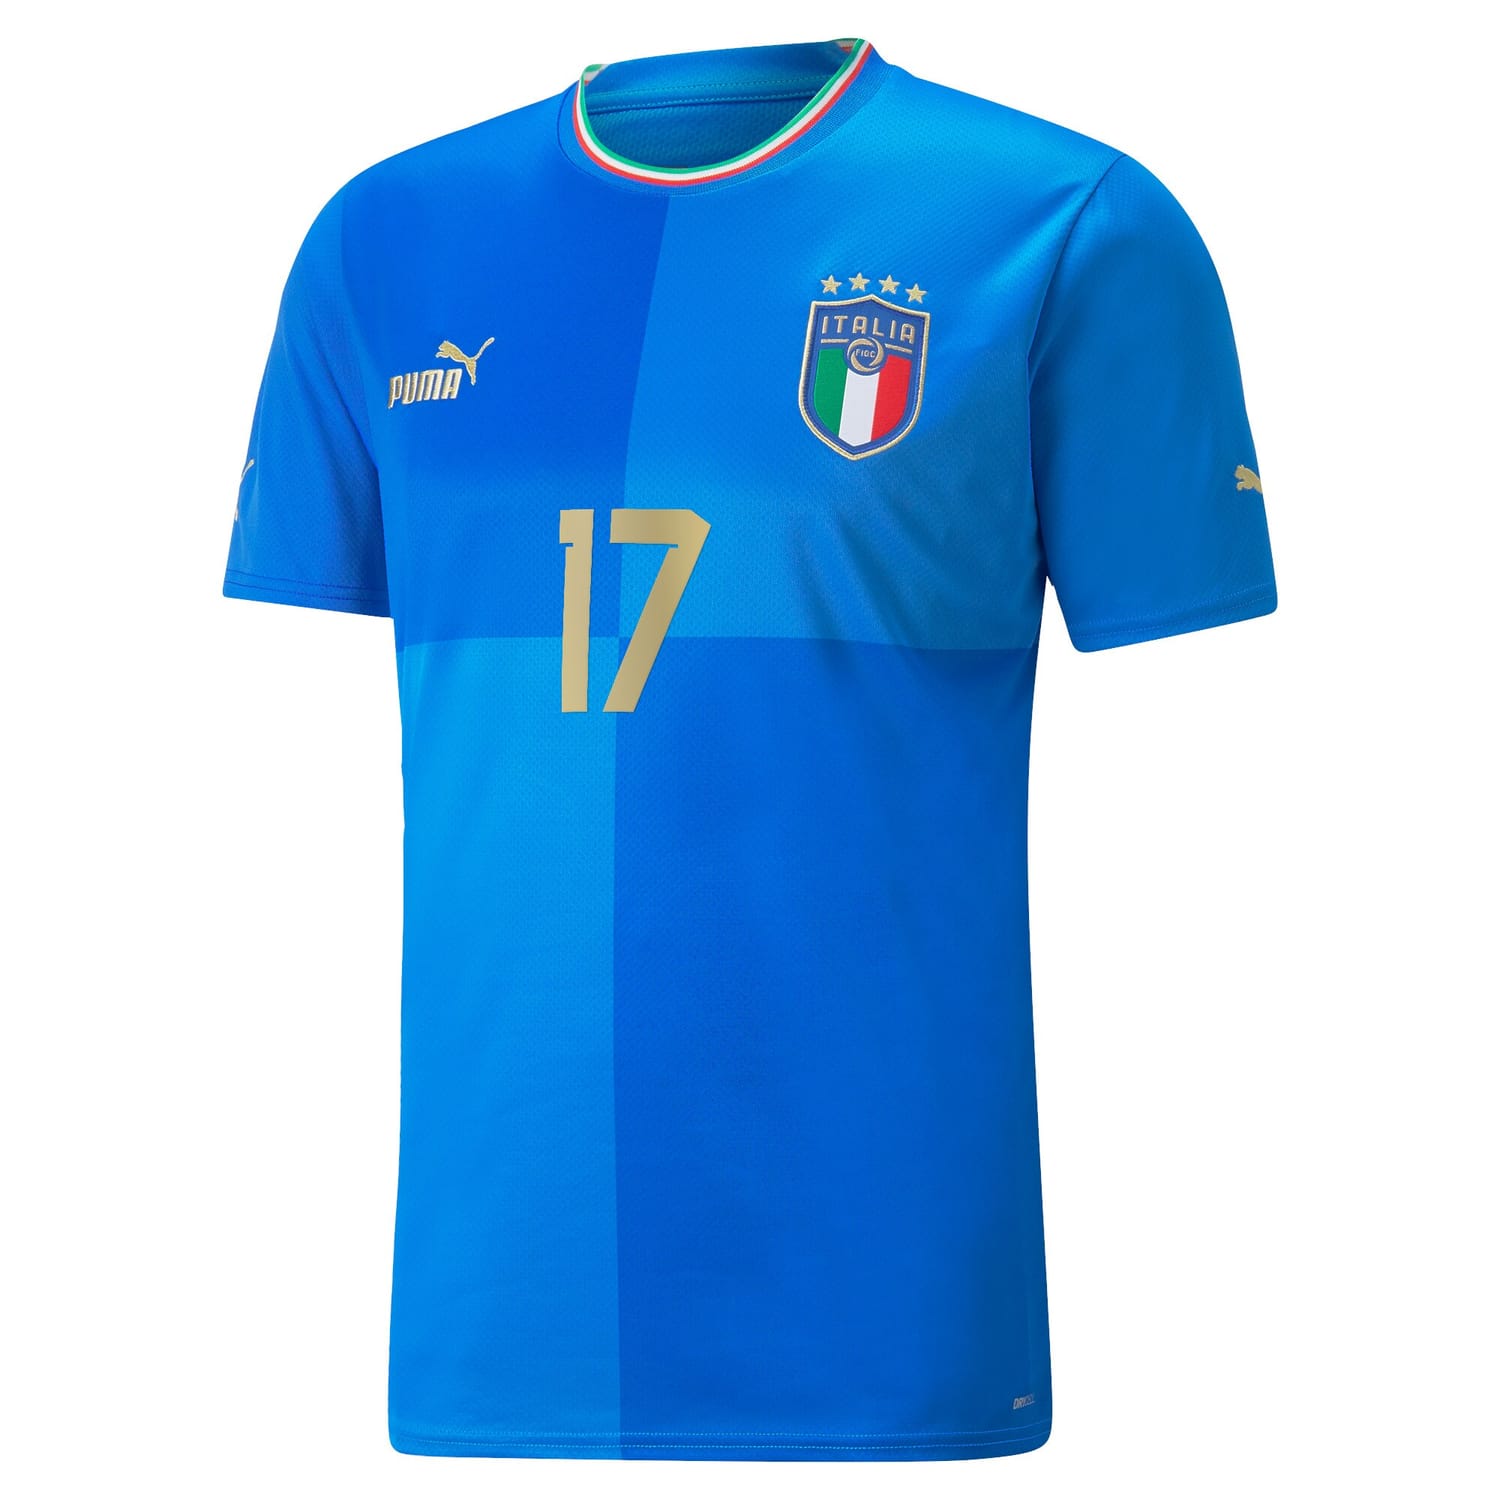 Italy National Team Home Jersey Shirt player Ciro Immobile 17 printing for Men